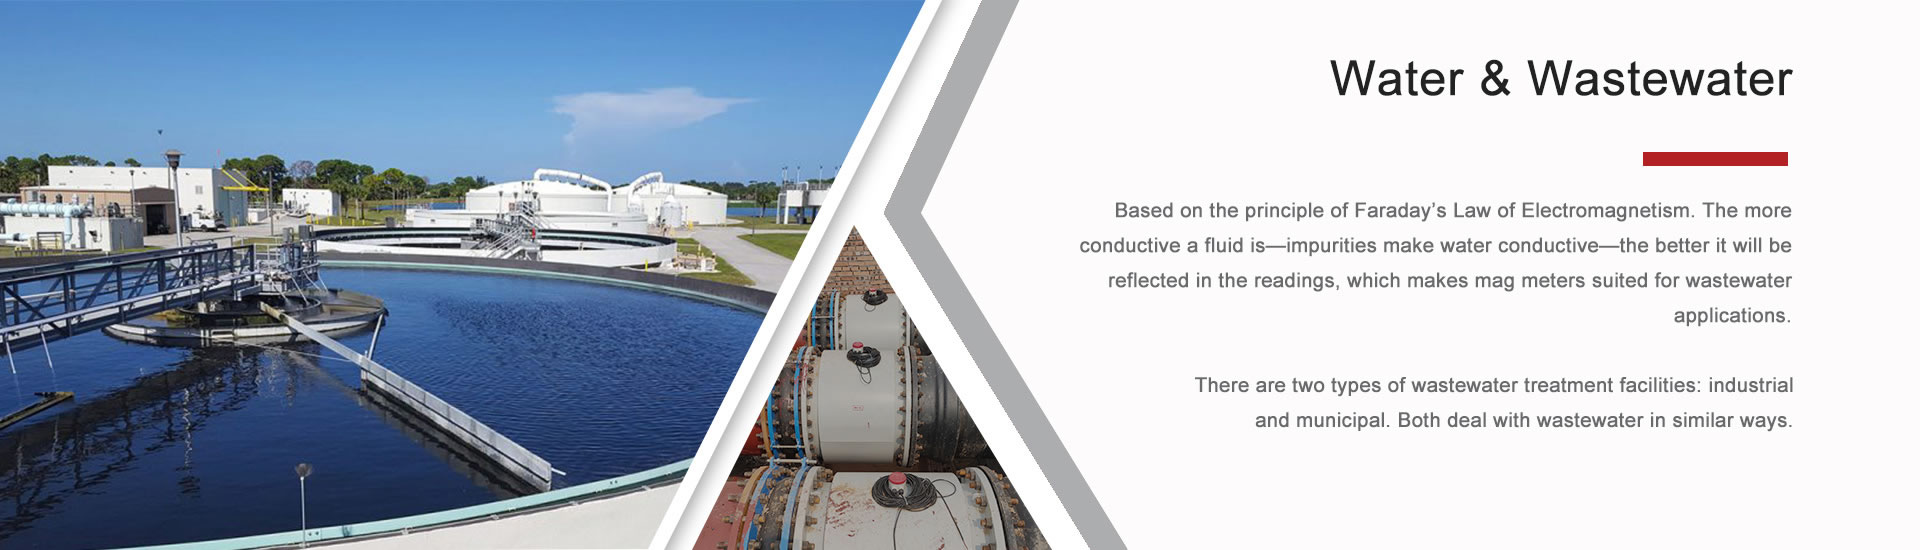 water & wastewater